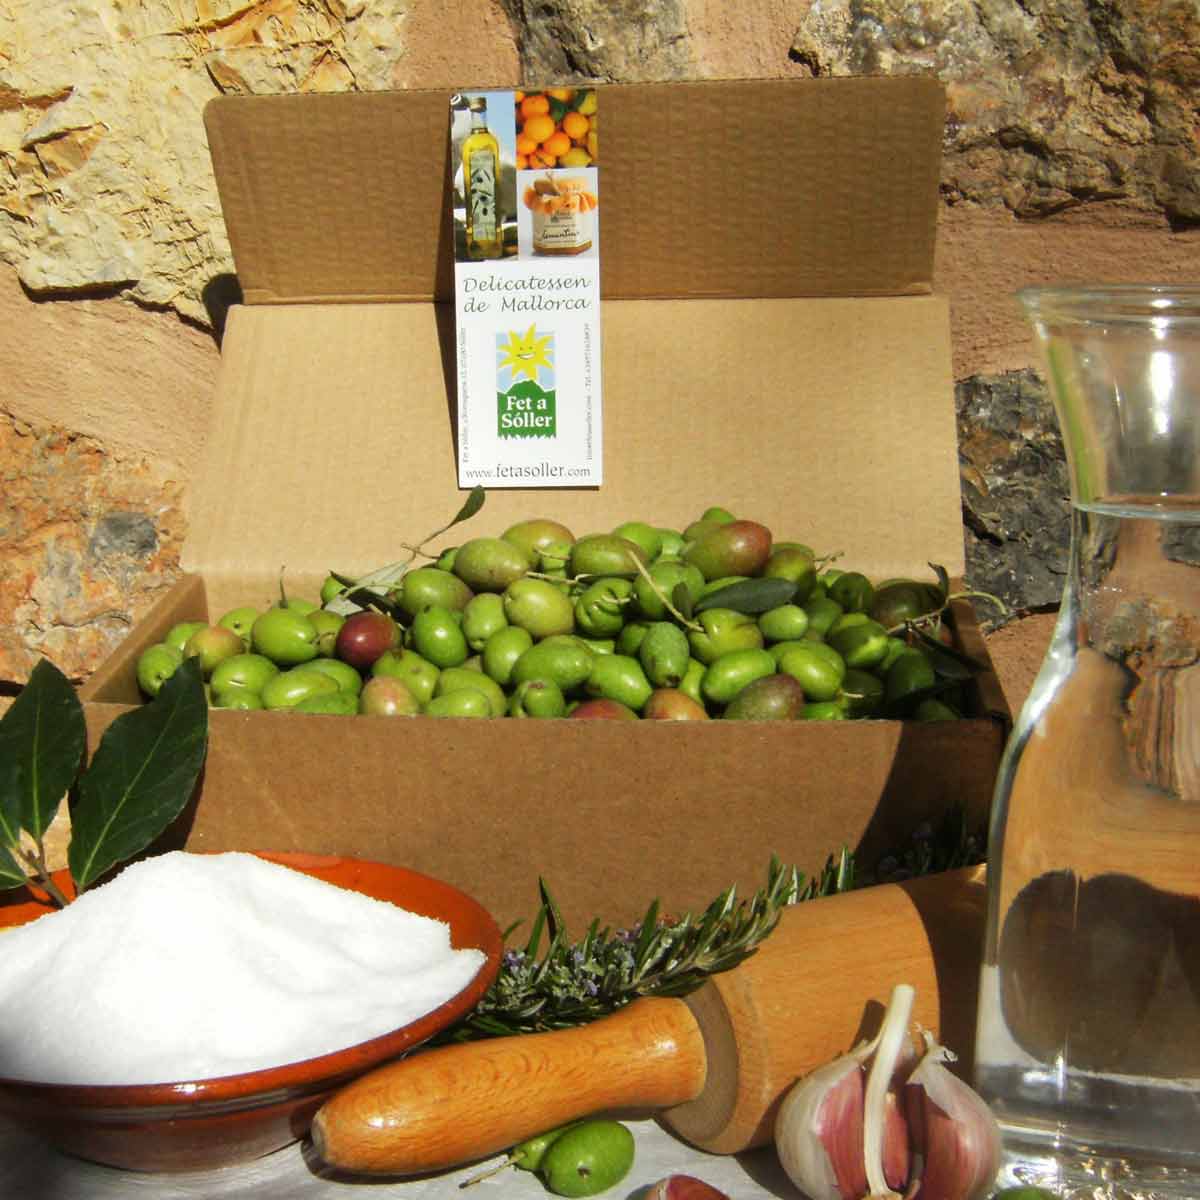 Fresh olives from Mallorca to pickle yourself